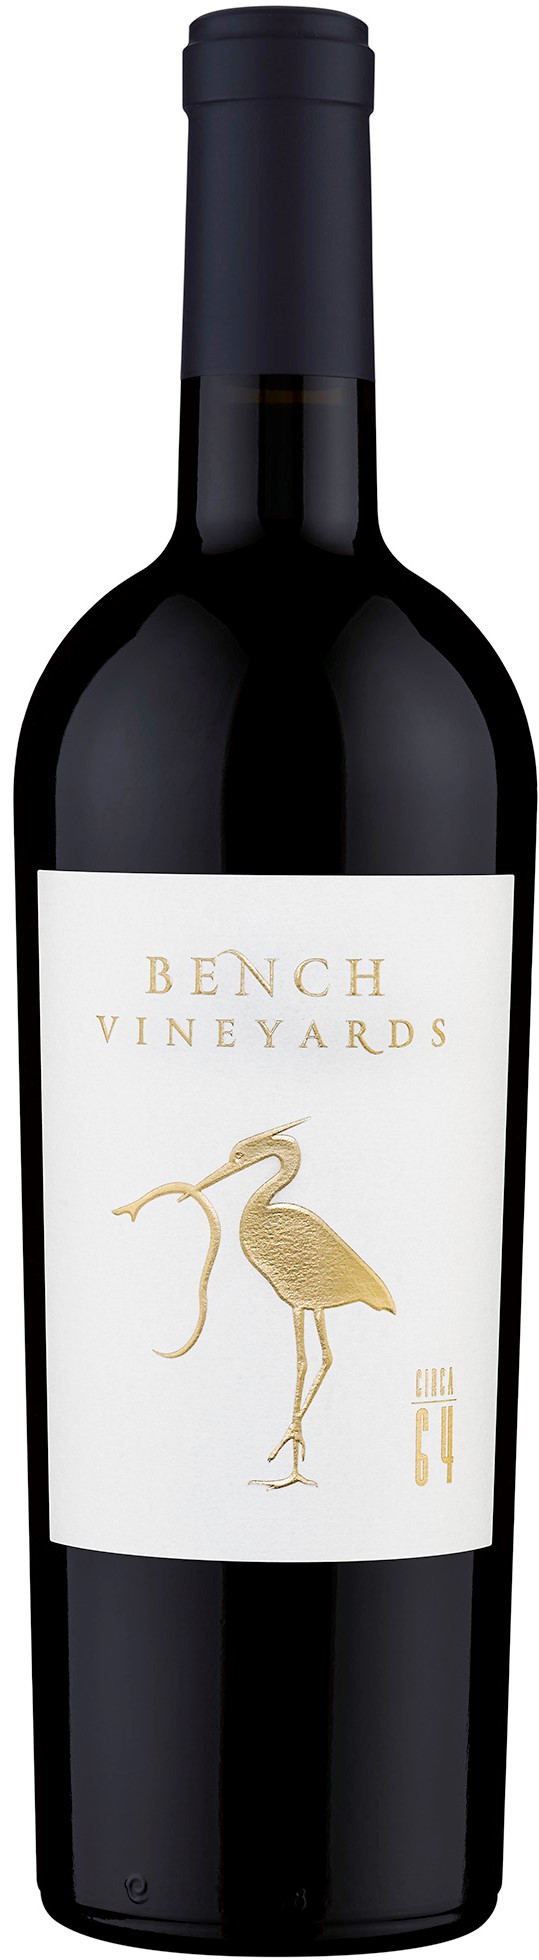 Product Image for 2017 Bench Vineyards "Circa 64" Red Wine, SLD